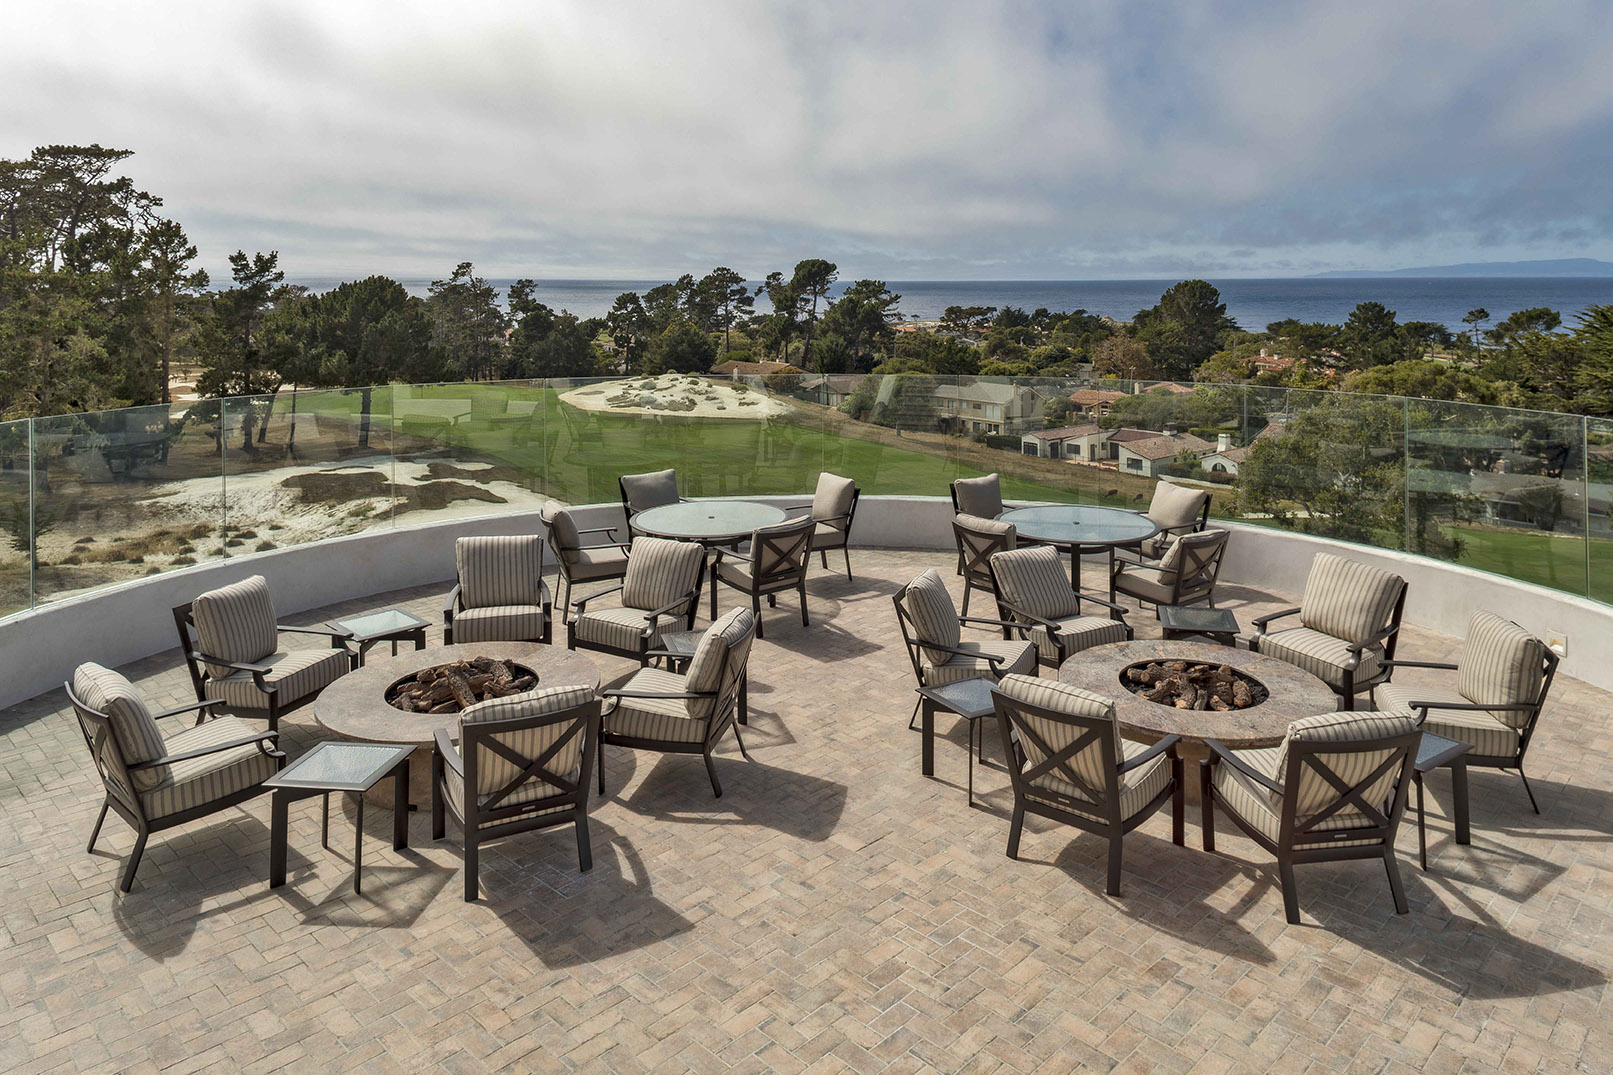 patio setting overlooking the water at Monterey Peninsula Country Club by J Banks Design